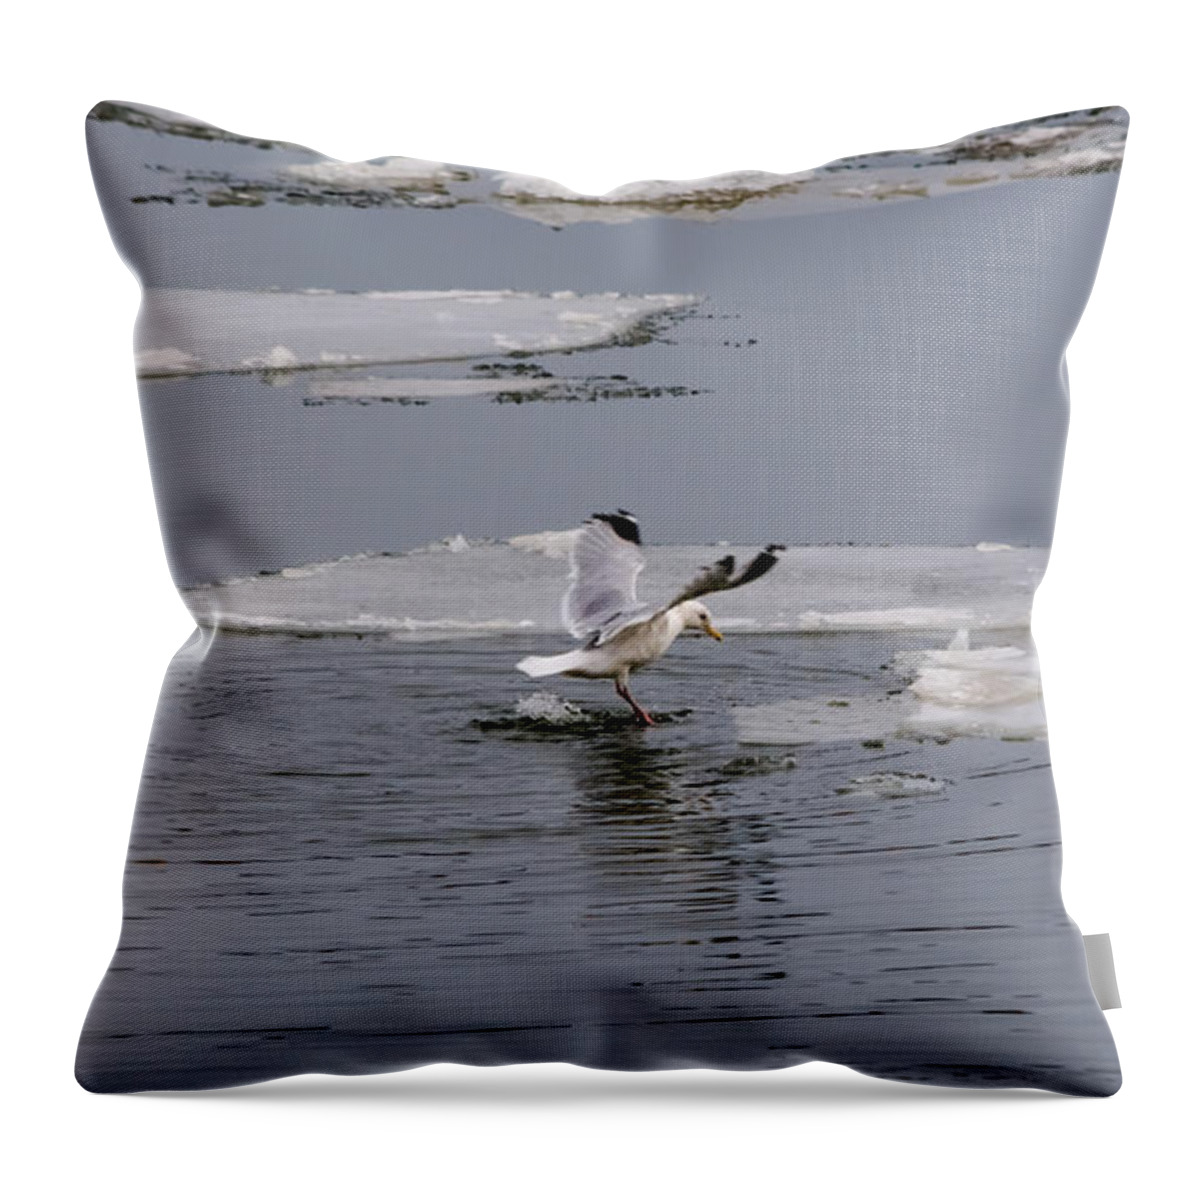 Gull Throw Pillow featuring the photograph Gull Standing On Thin Ice by Holden The Moment